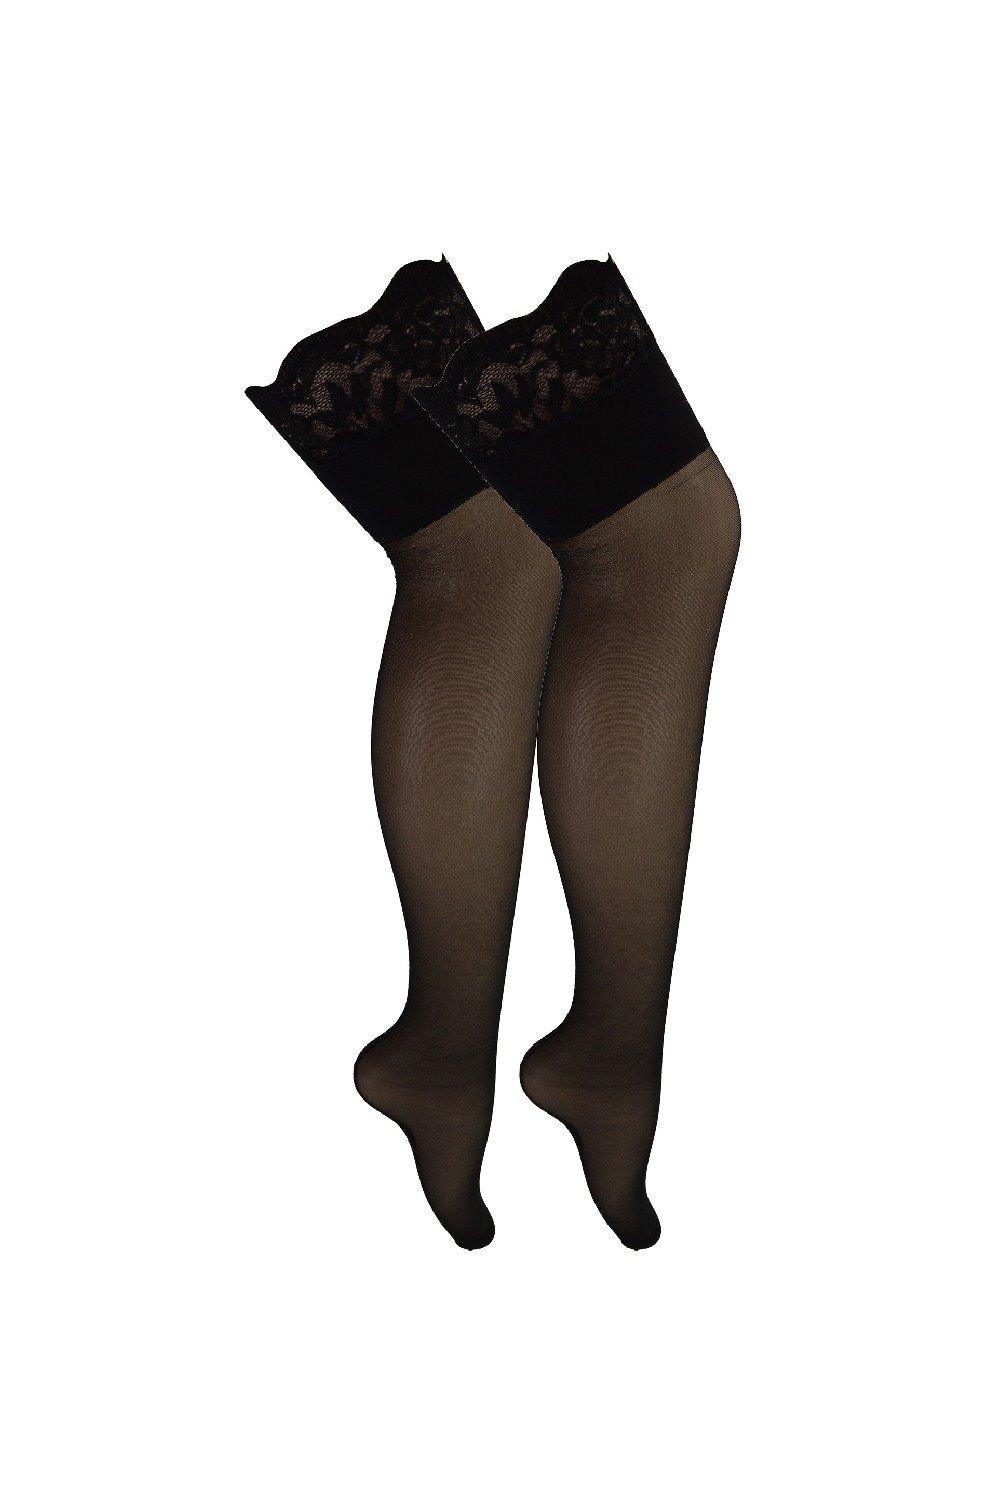 2 Pair Seamed Thigh High Stockings with Lace Top